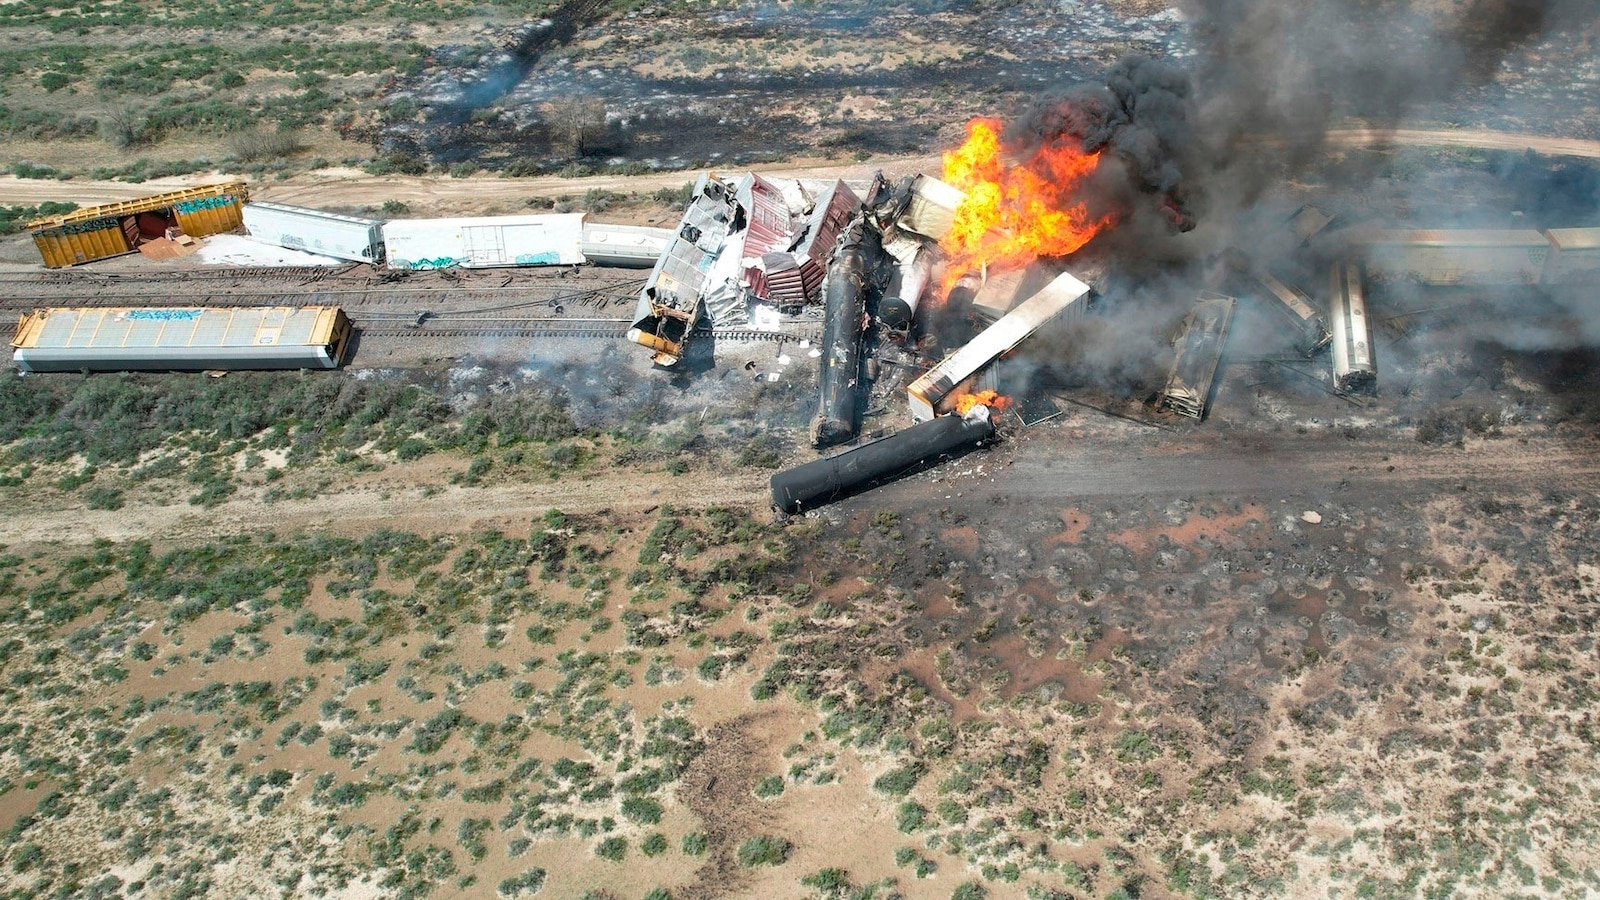 Investigation underway after freight train carrying fuel derails near Arizona-New Mexico border [Video]